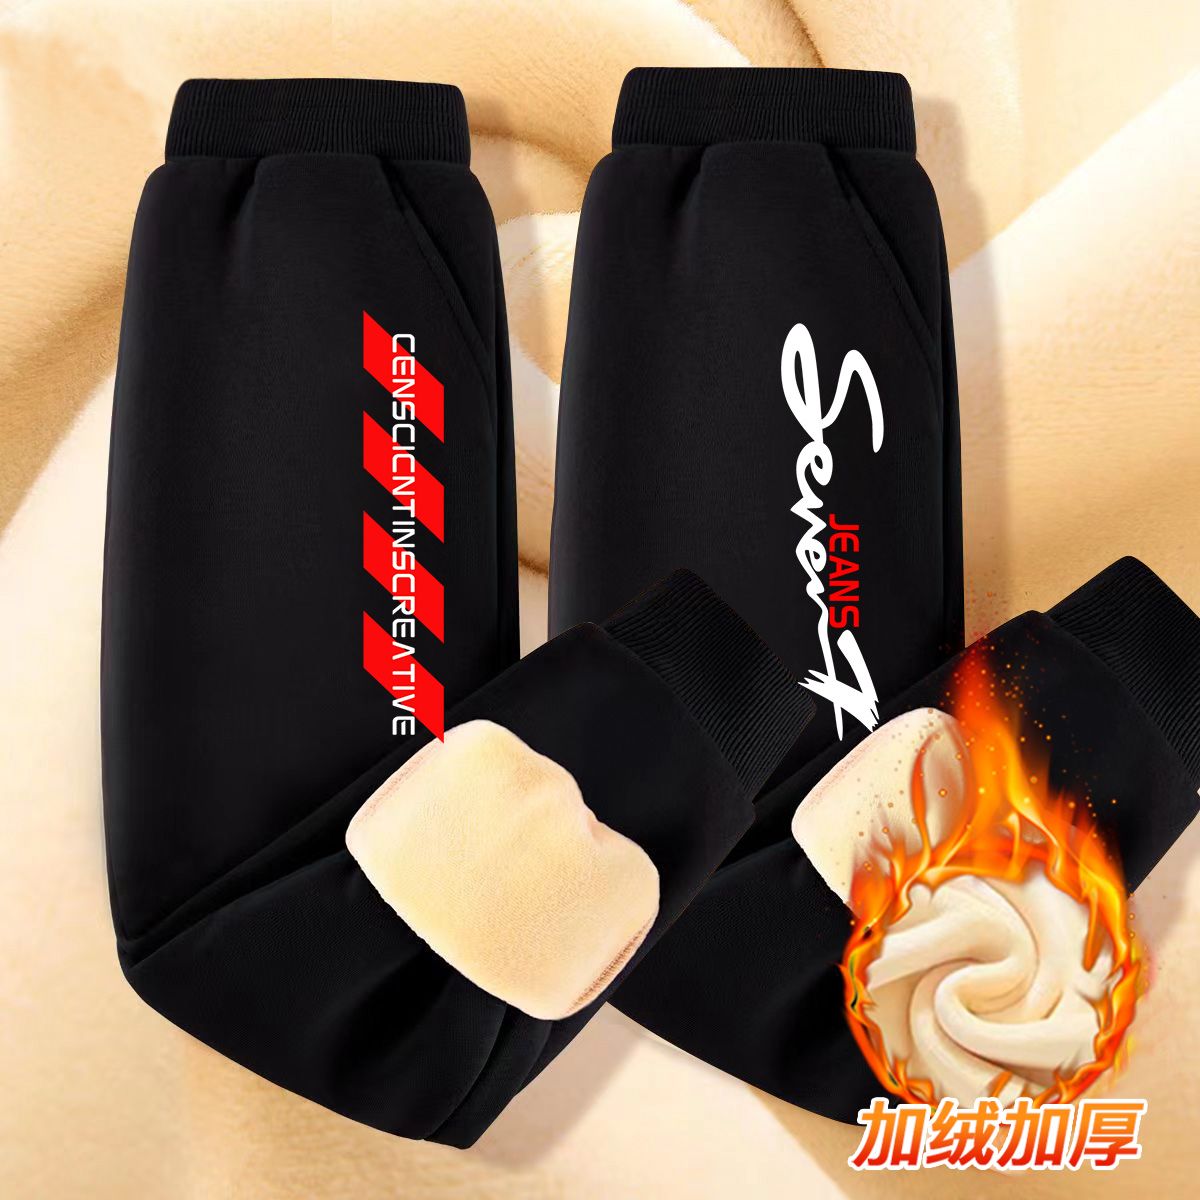 Boys' velvet warm sweatpants winter wear  new boys' cool casual trousers, medium and large children's winter sports pants